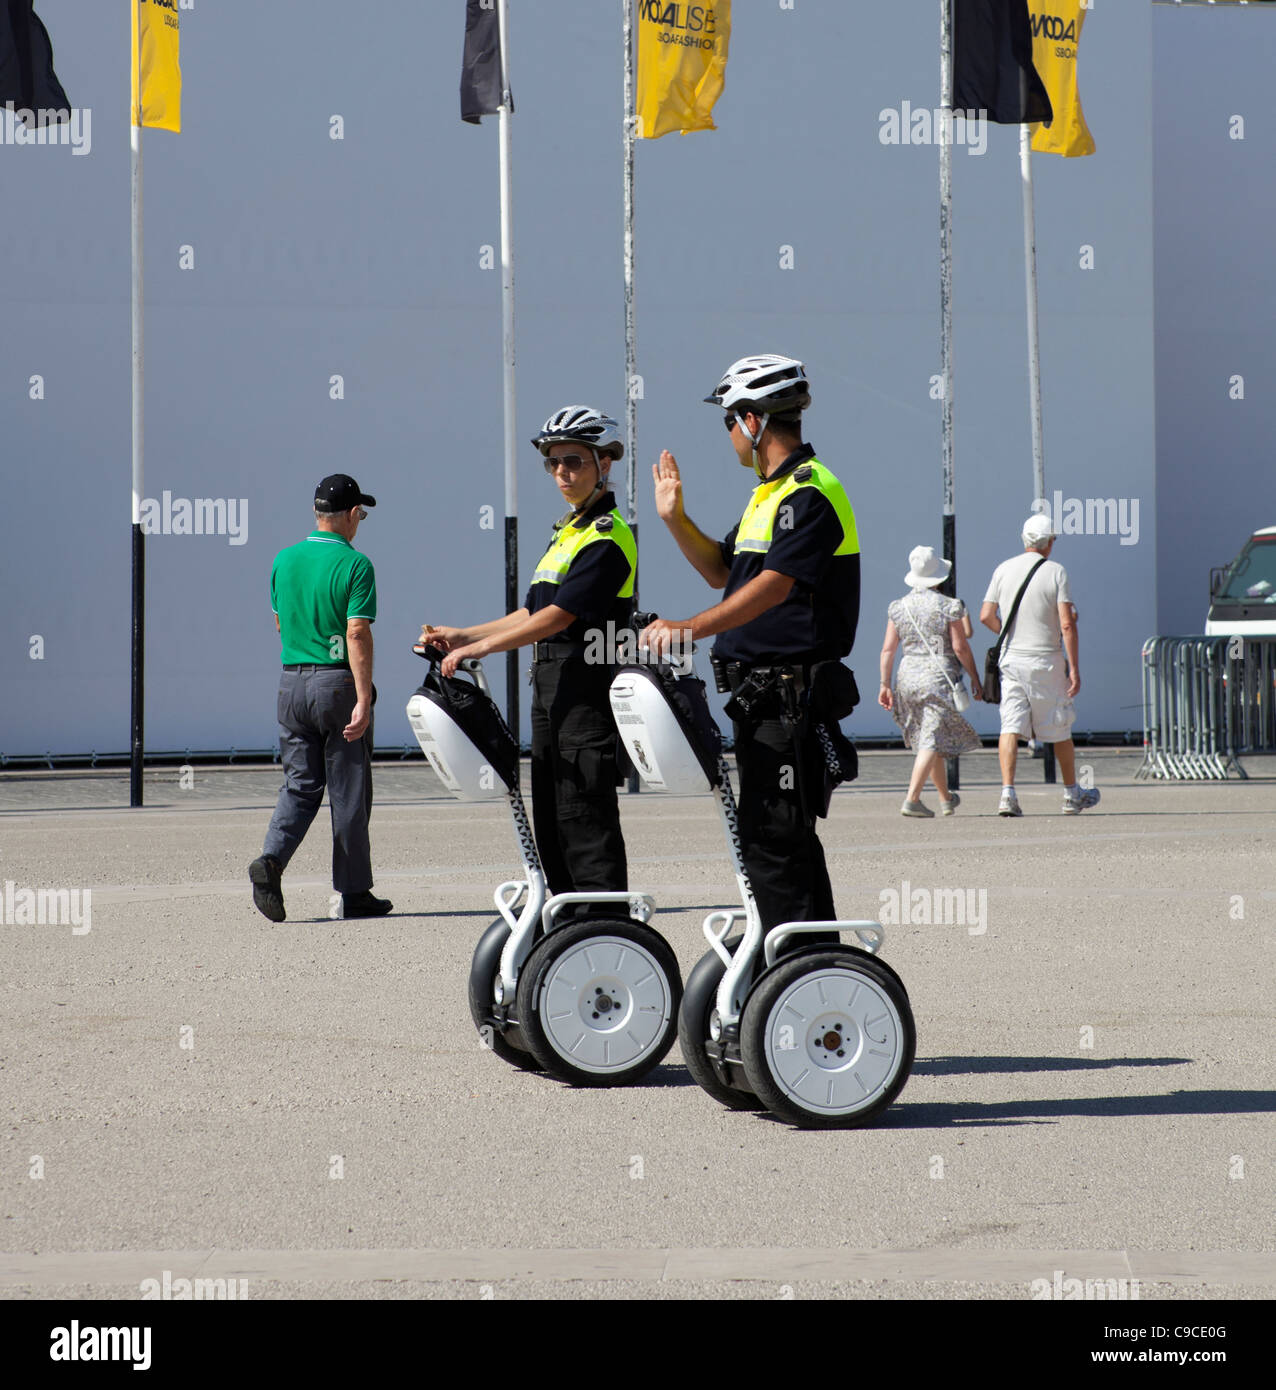 Male female polocie officers on Segway vehicles Lisbon Portugal Europe Stock Photo